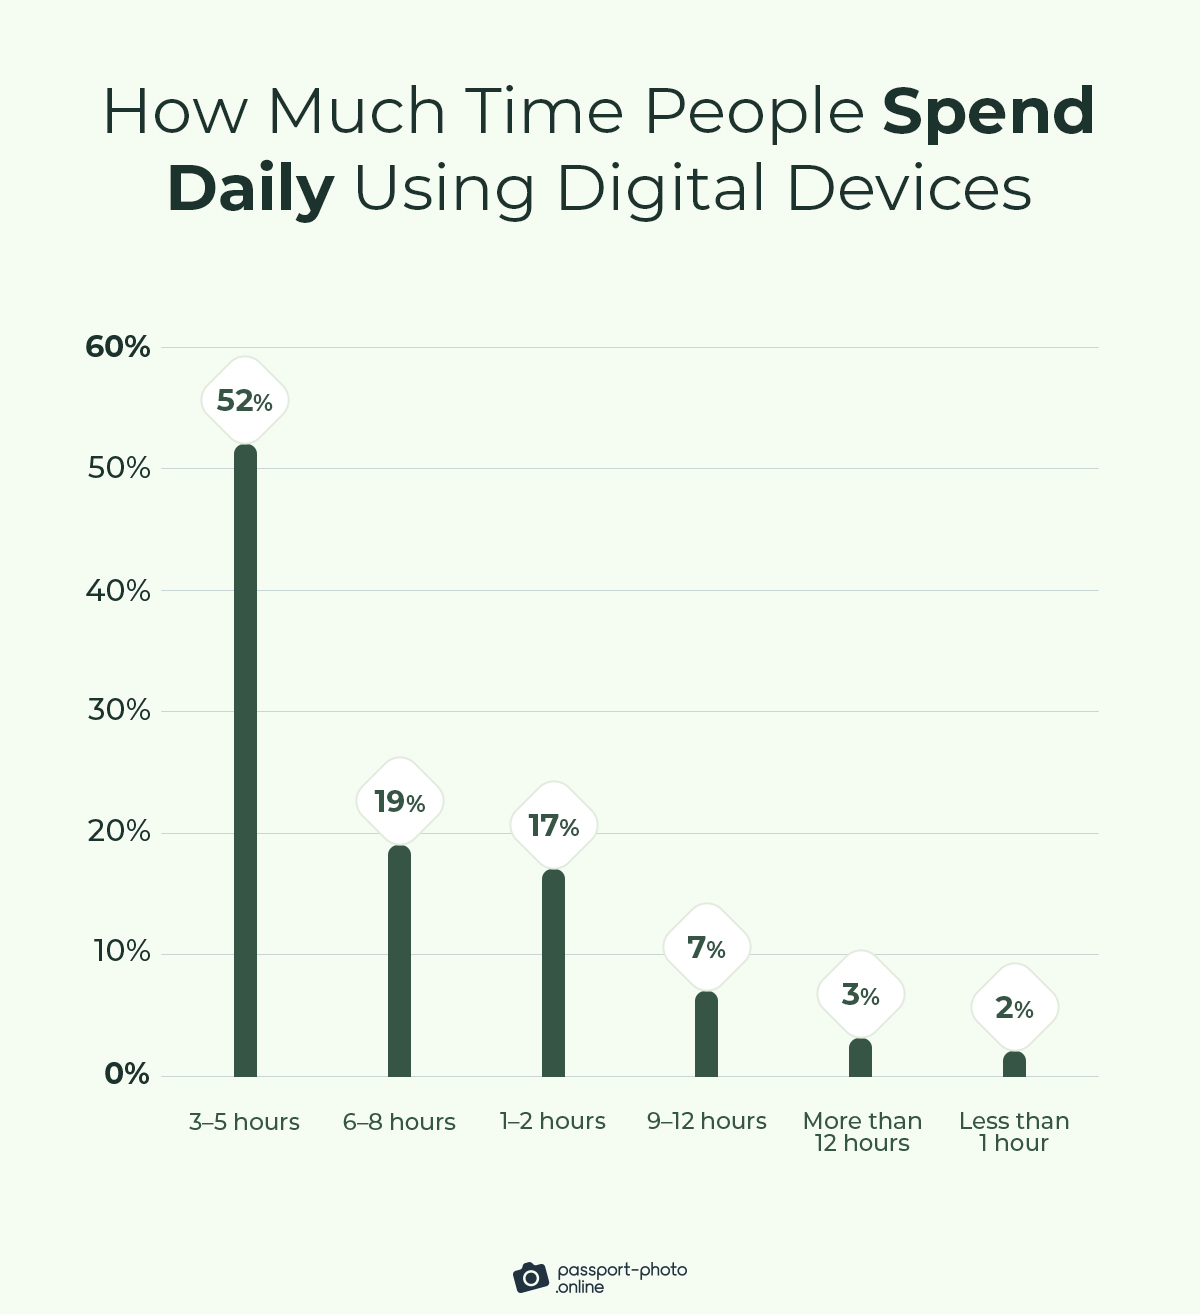 the majority of people (52%) spend between three and five hours daily on their devices